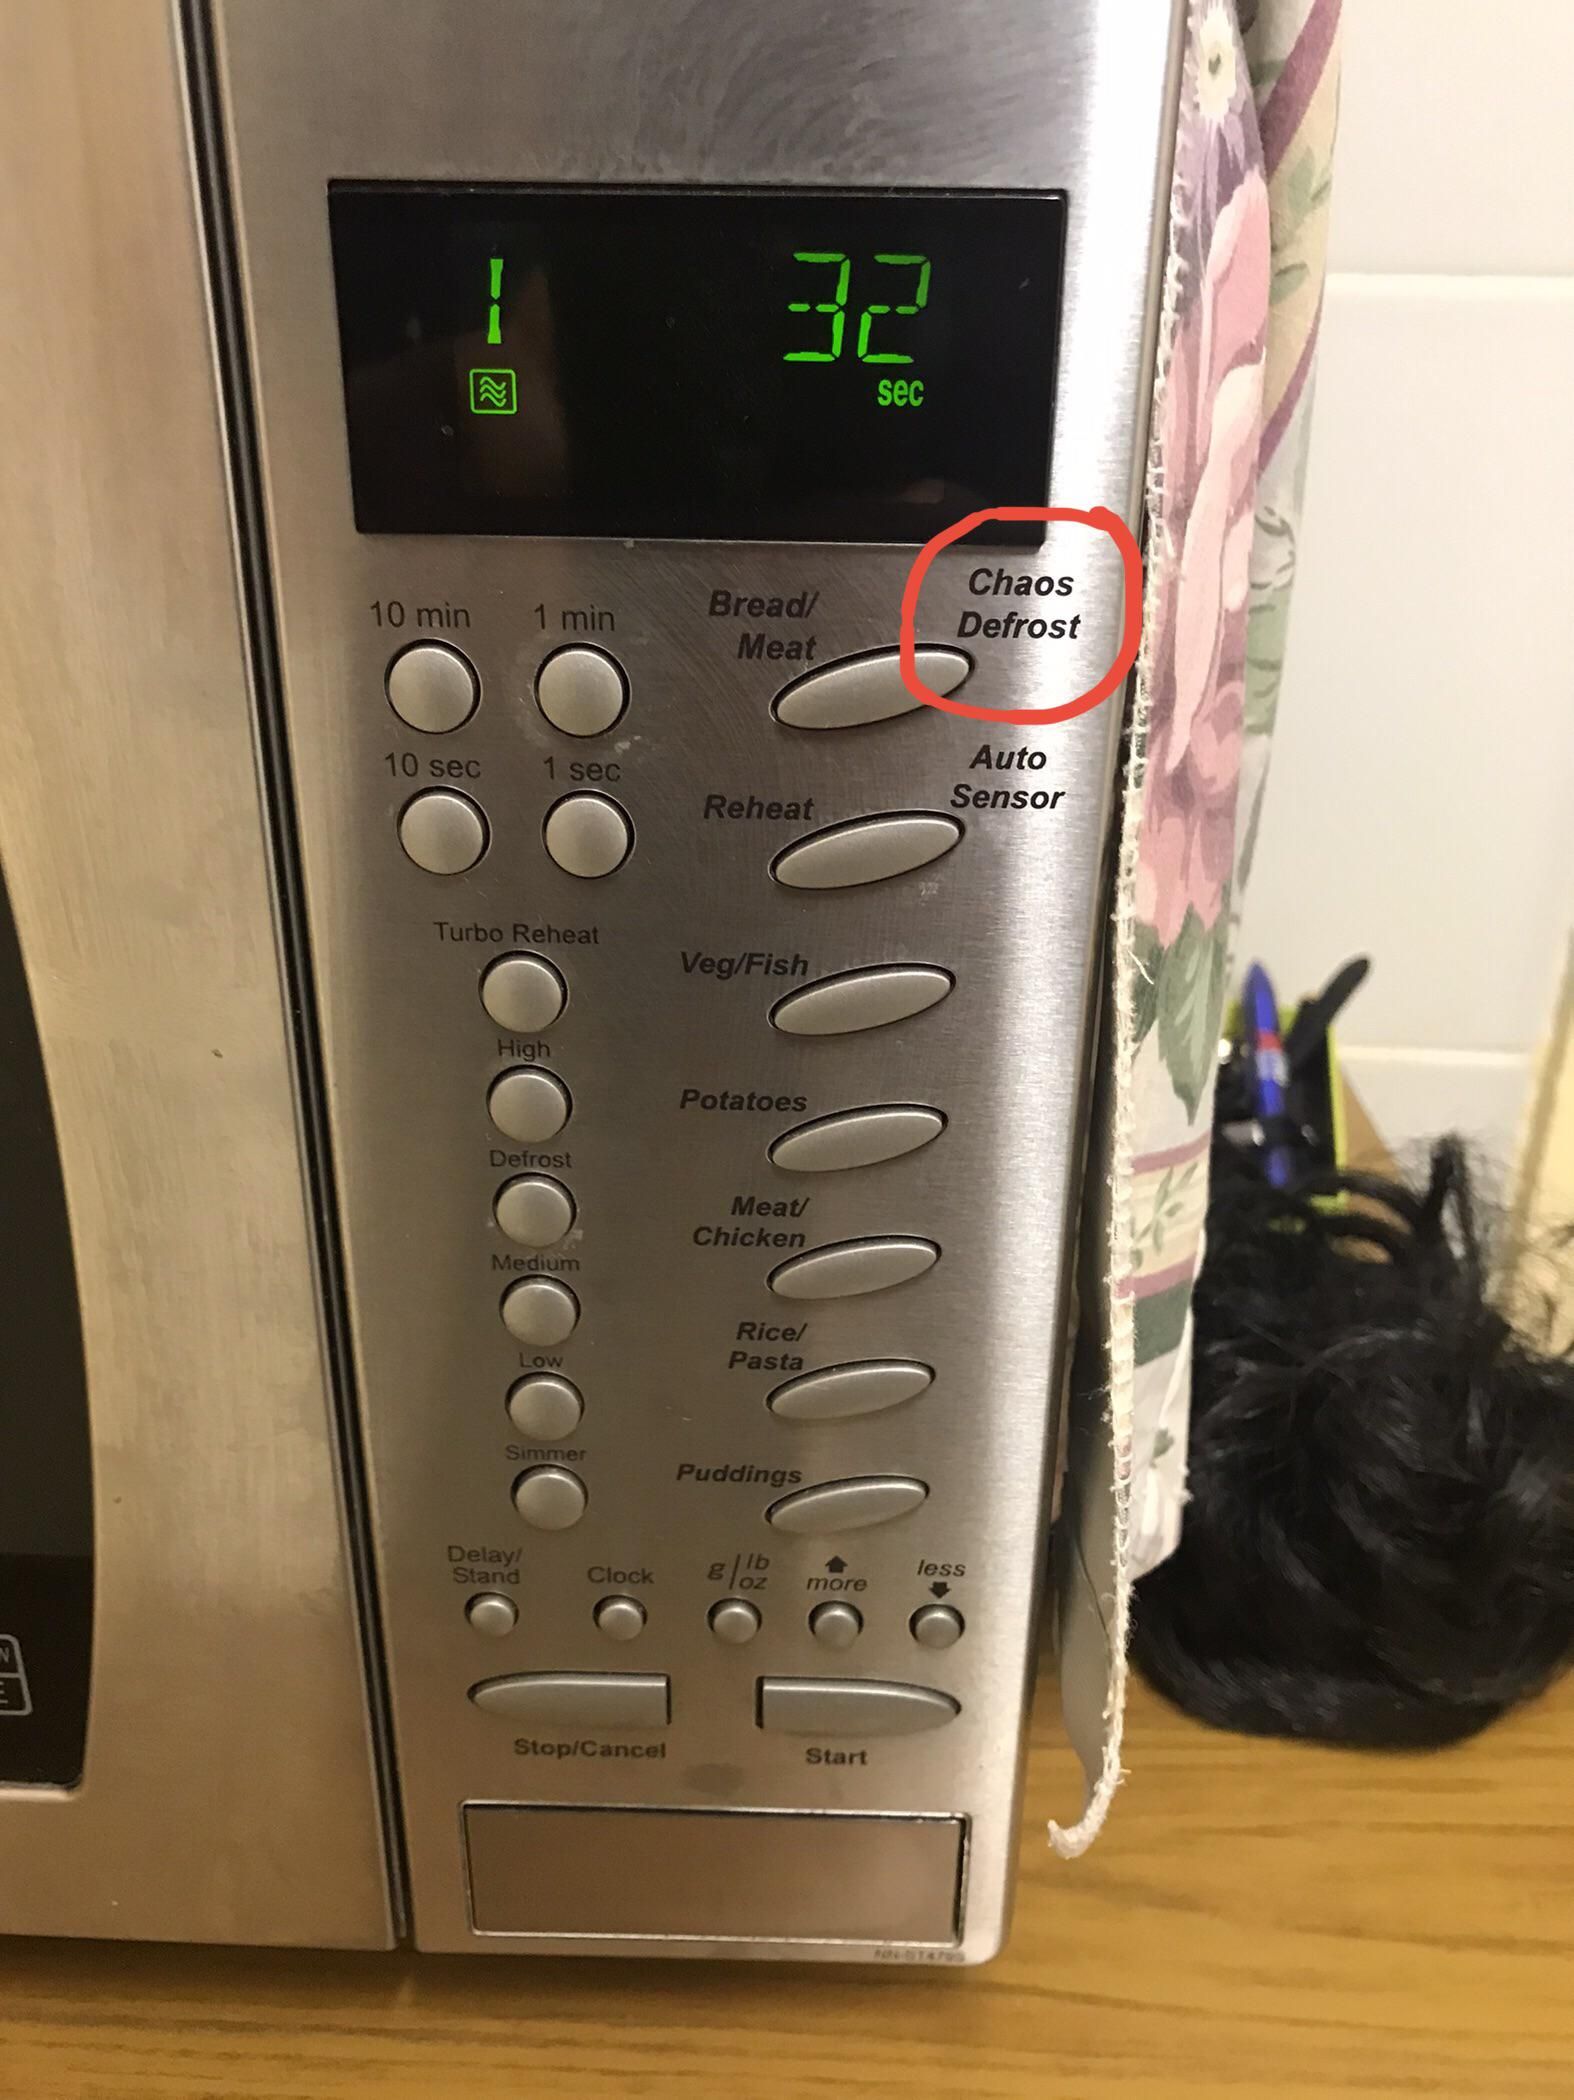 My in law’s microwave has a setting I’m not brave enough to try in 2020